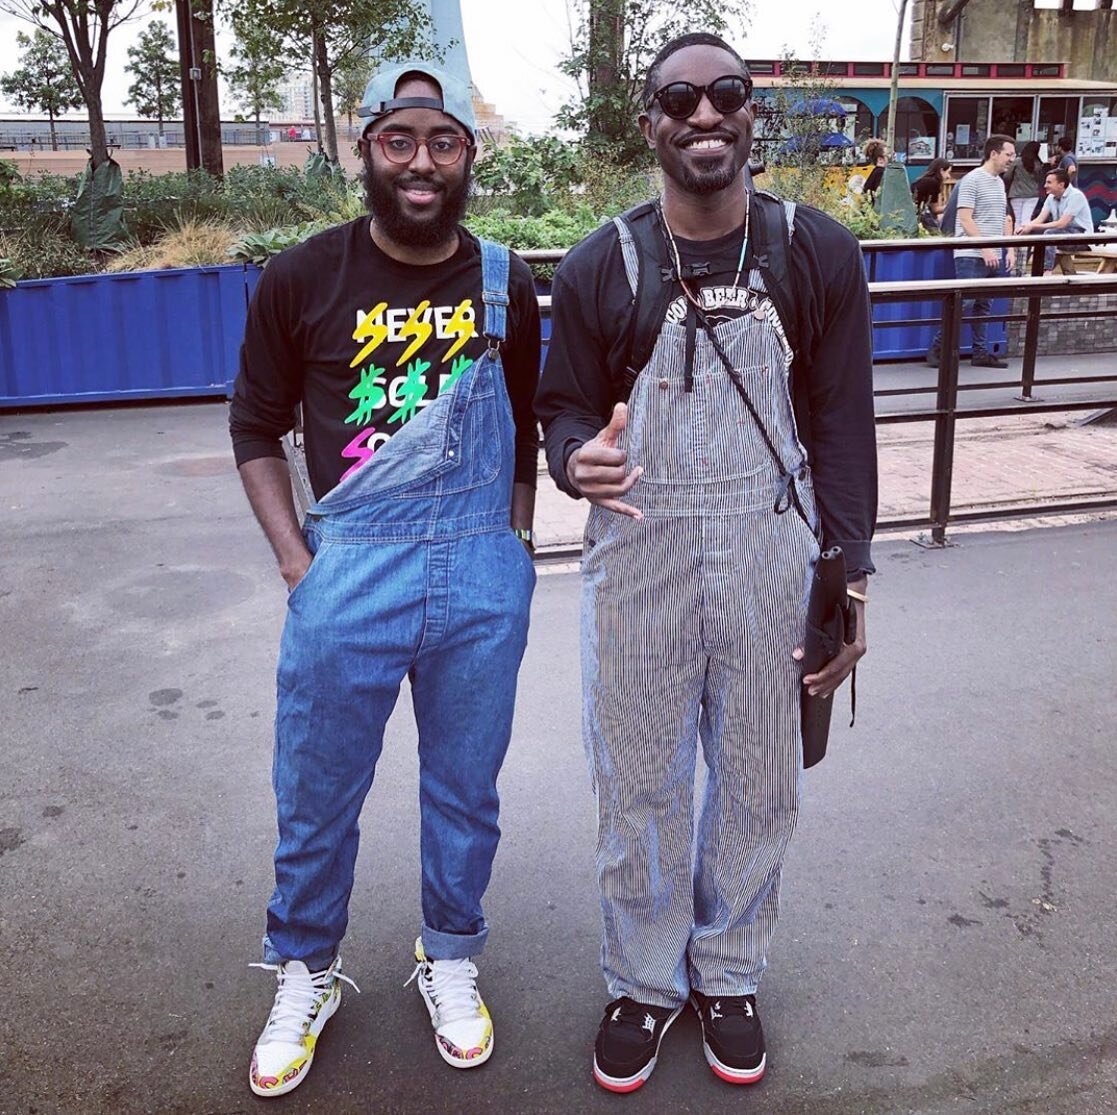 Gotta love this picture of the always stylish @curran_j rocking our Whiz Wit frames in Ruby next to 🤩 @andre3000 🤩 last summer!

Nothing like a solid eyeglass frame and a pair of overalls! Click the 💥link in bio💥 to get glasses of your own!